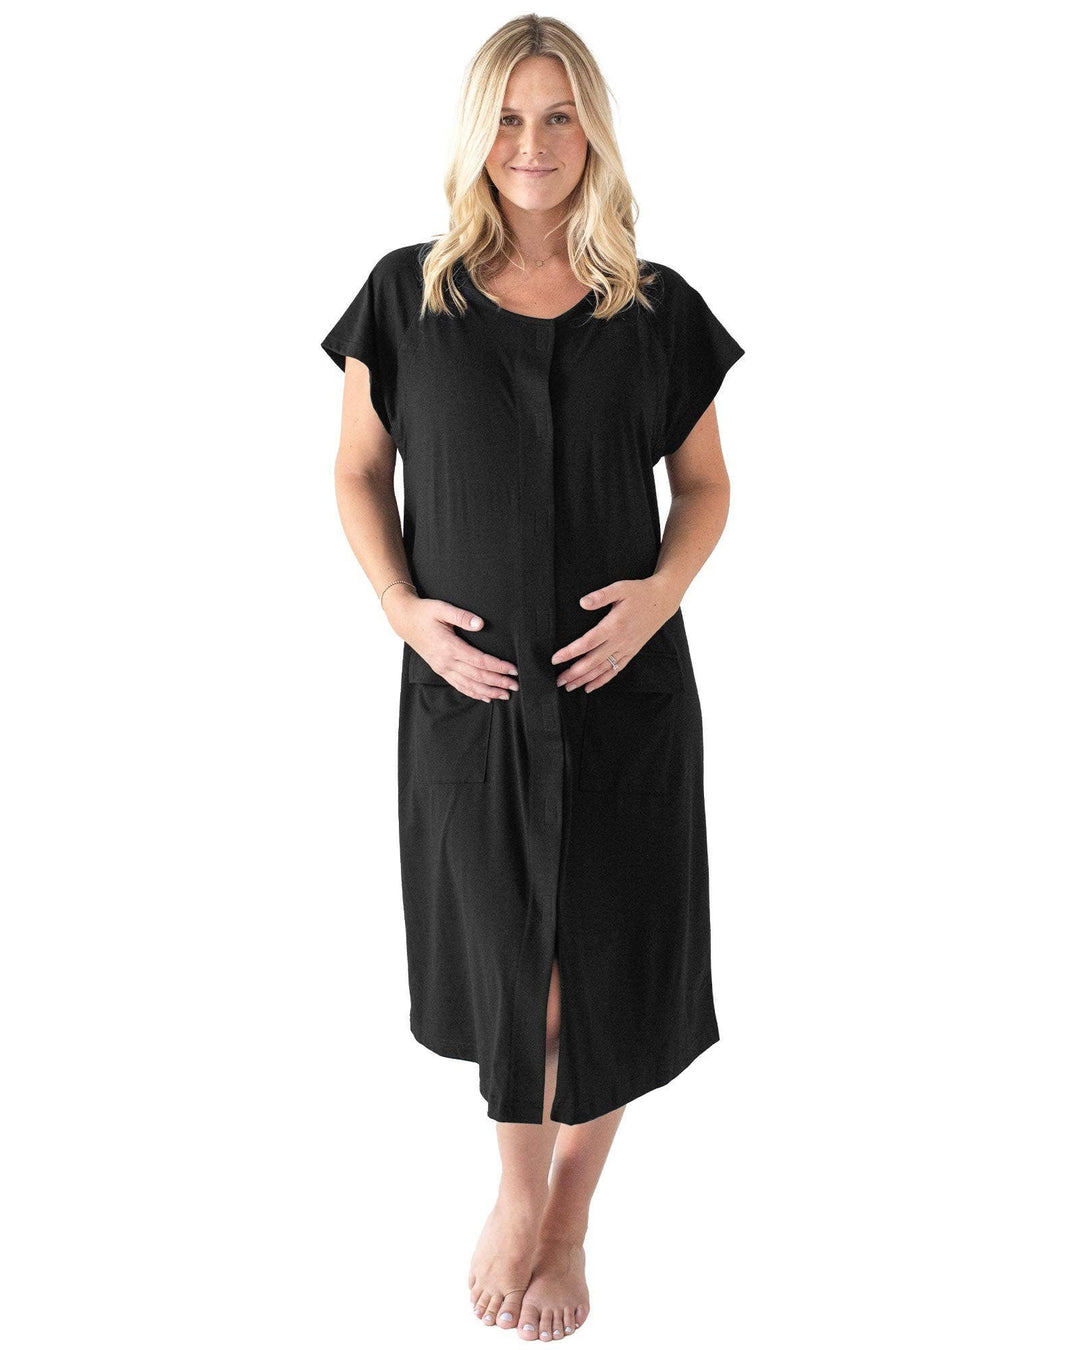 Kindred Bravely - 3 In 1 Universal Labor, Delivery & Nursing Gown Black